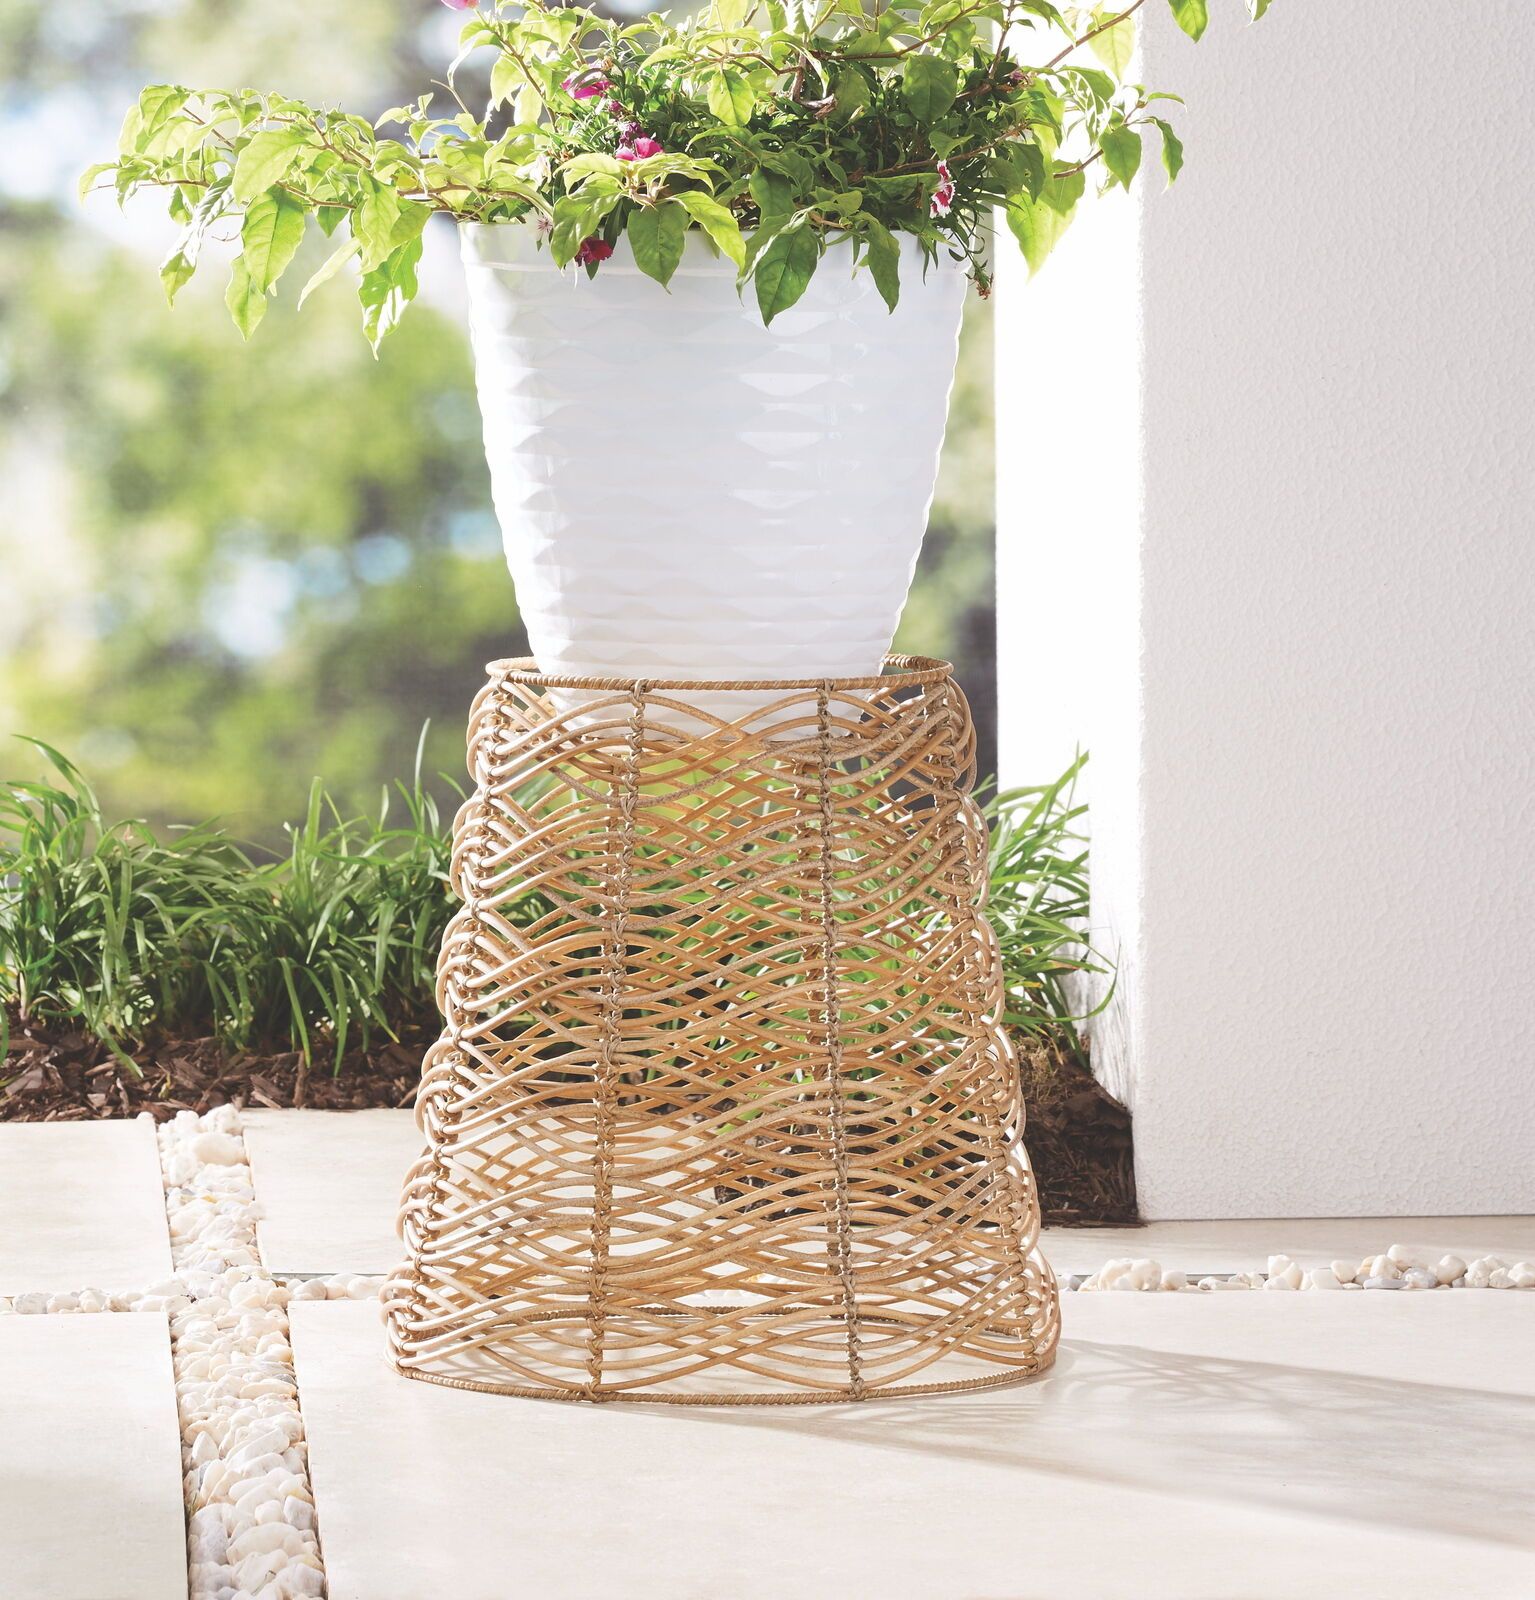 Ventura Resin Rattan Woven Plant Stand With Metal Frame Indoor Outdoor  Decor New | Ebay Pertaining To Resin Plant Stands (View 10 of 15)